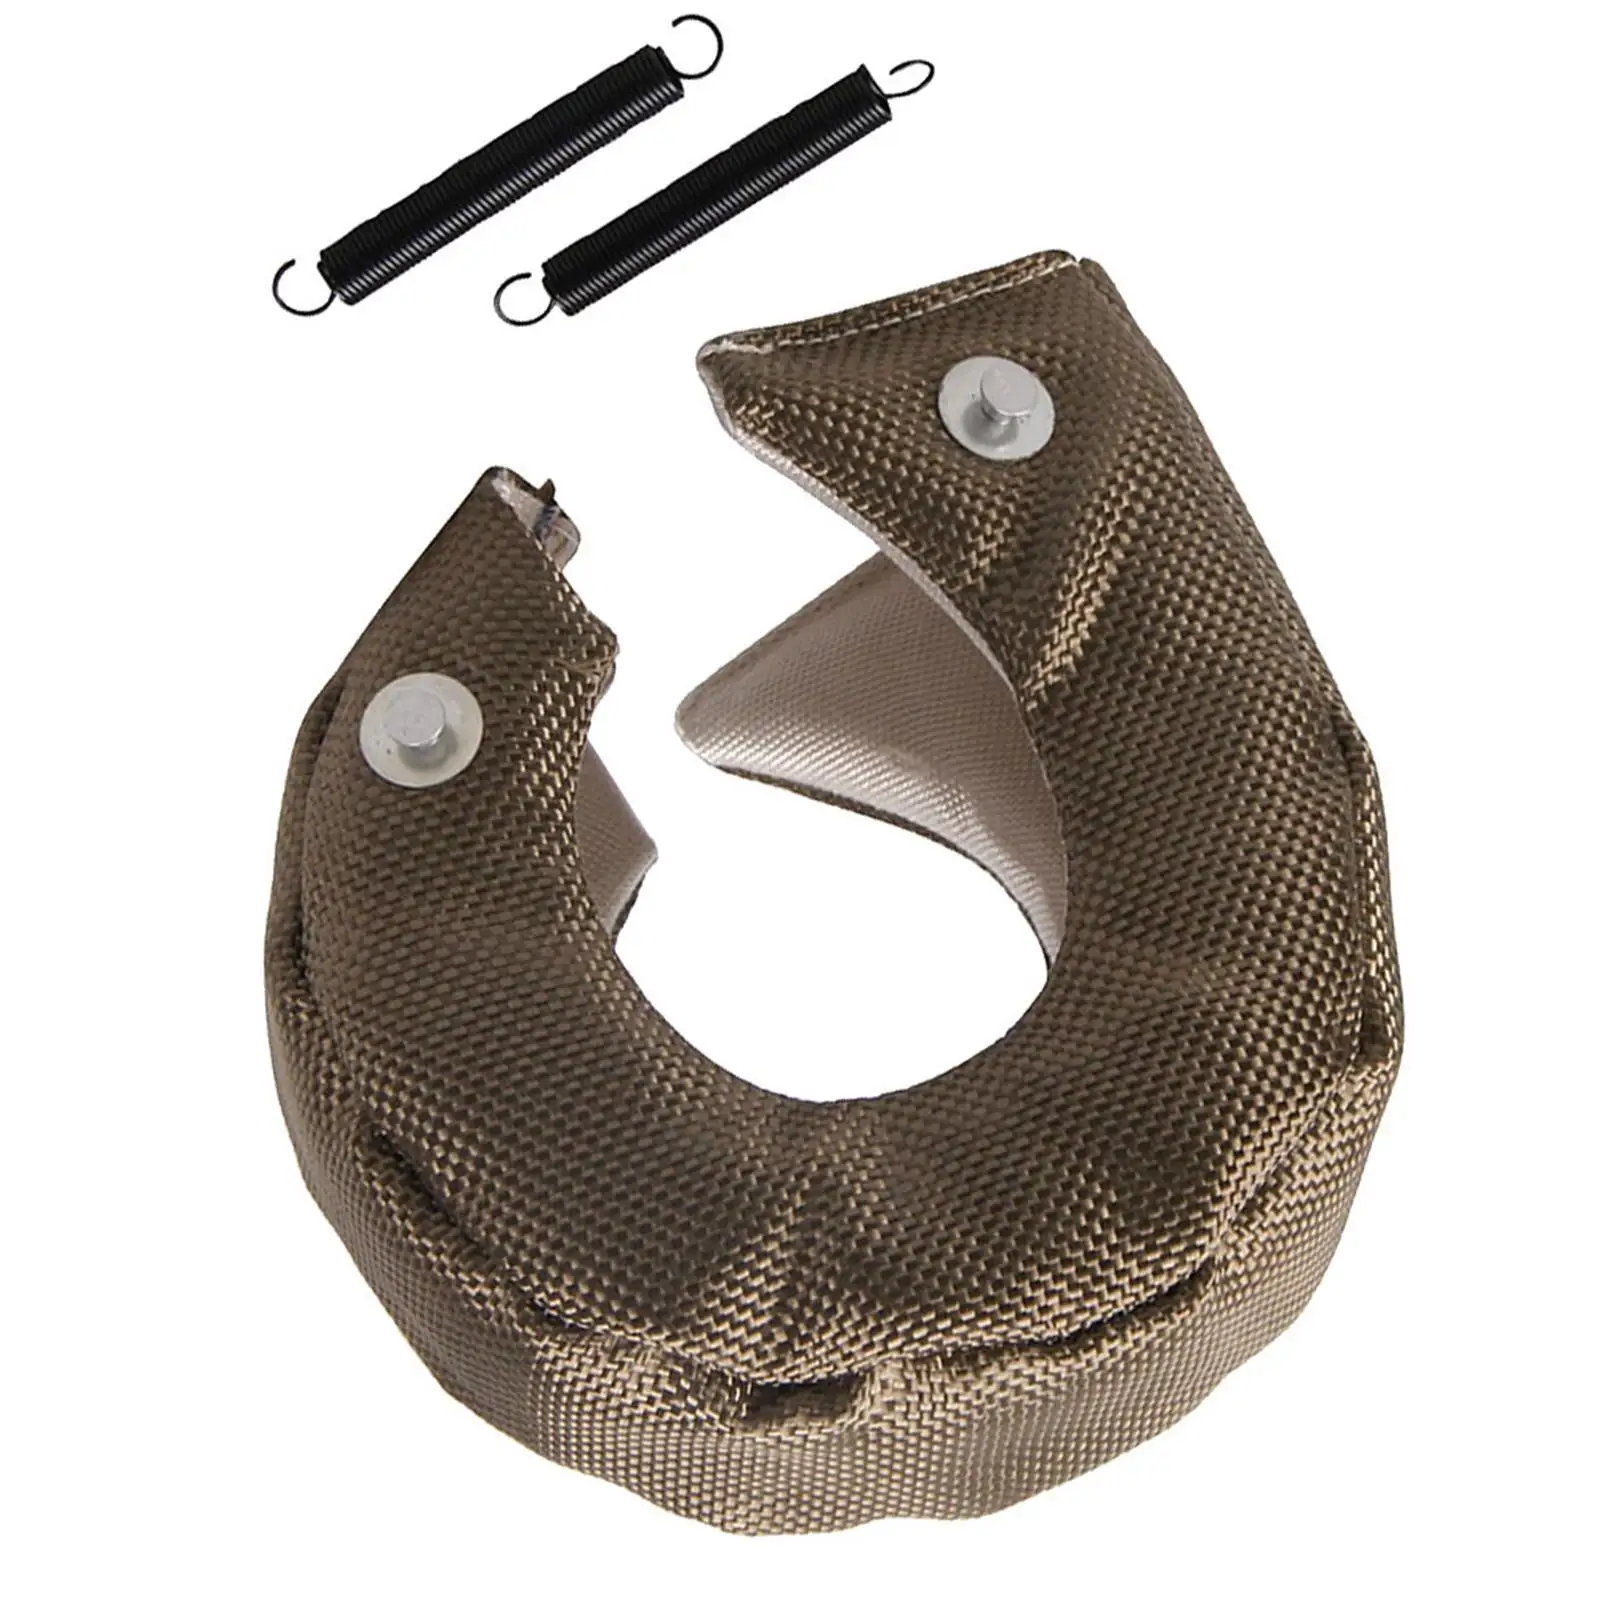 

Turbocharger Heat Shield Cover With Fastener Springs Turbo Chargers Part Turbocompresor for T3 Fireproof Turbo Blanket